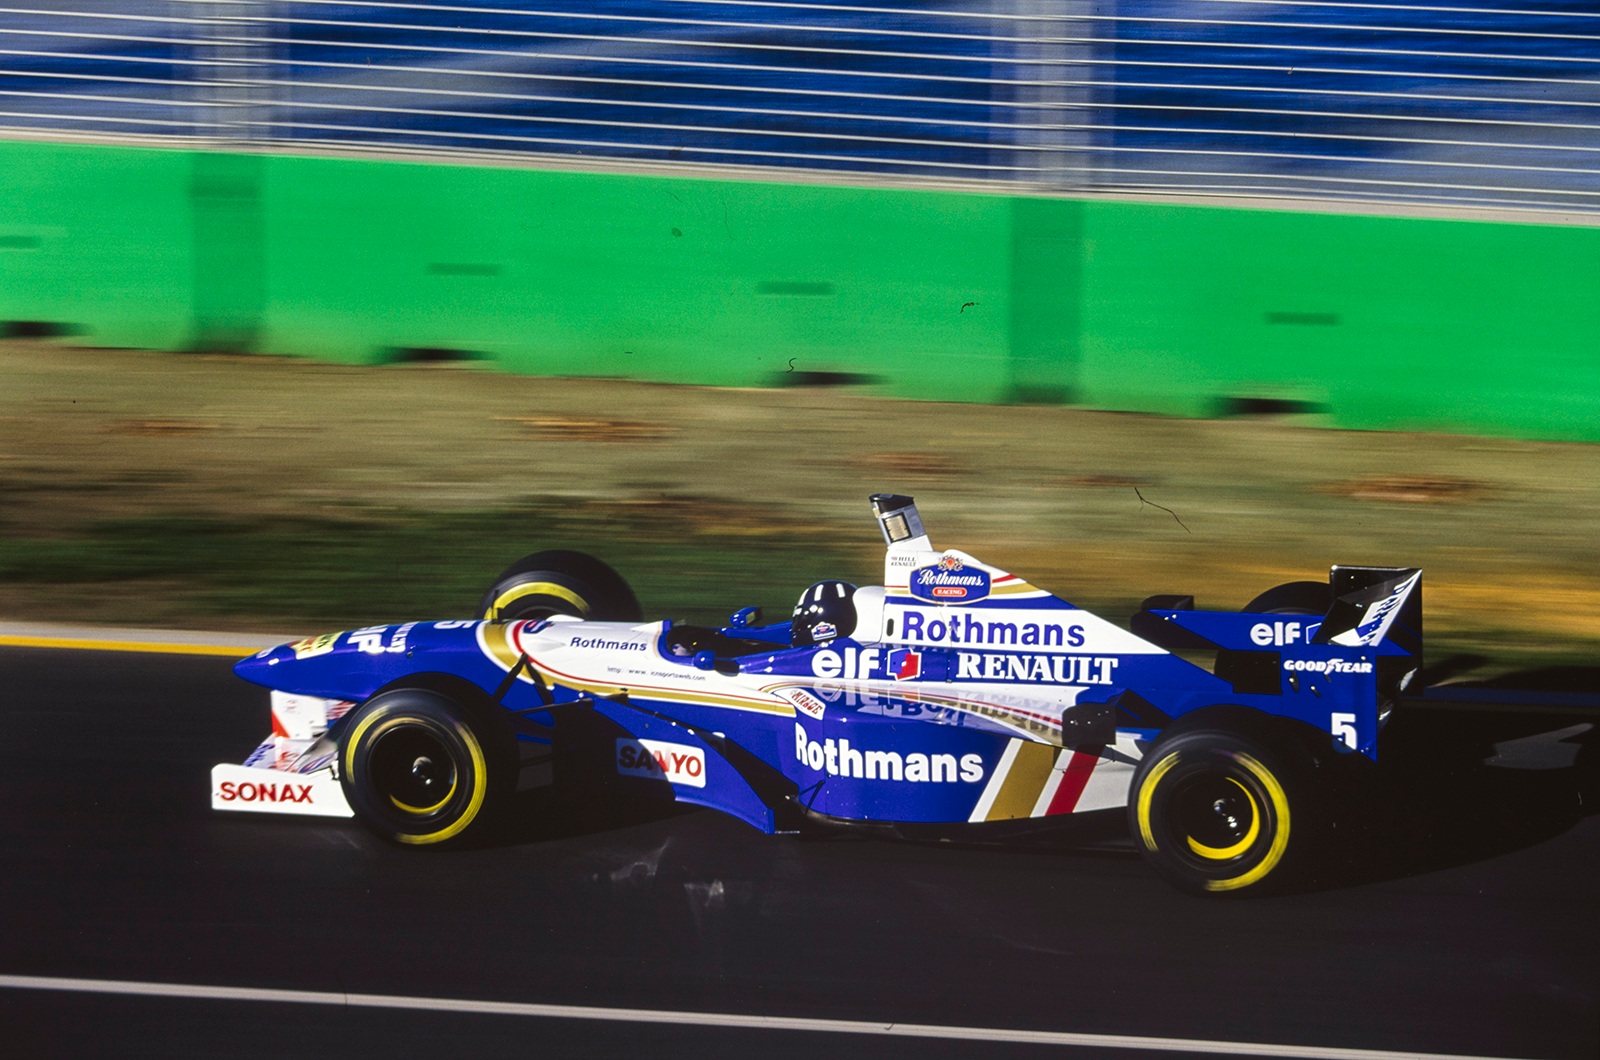 …and was back Down Under to win again for Williams at the first race of 1996